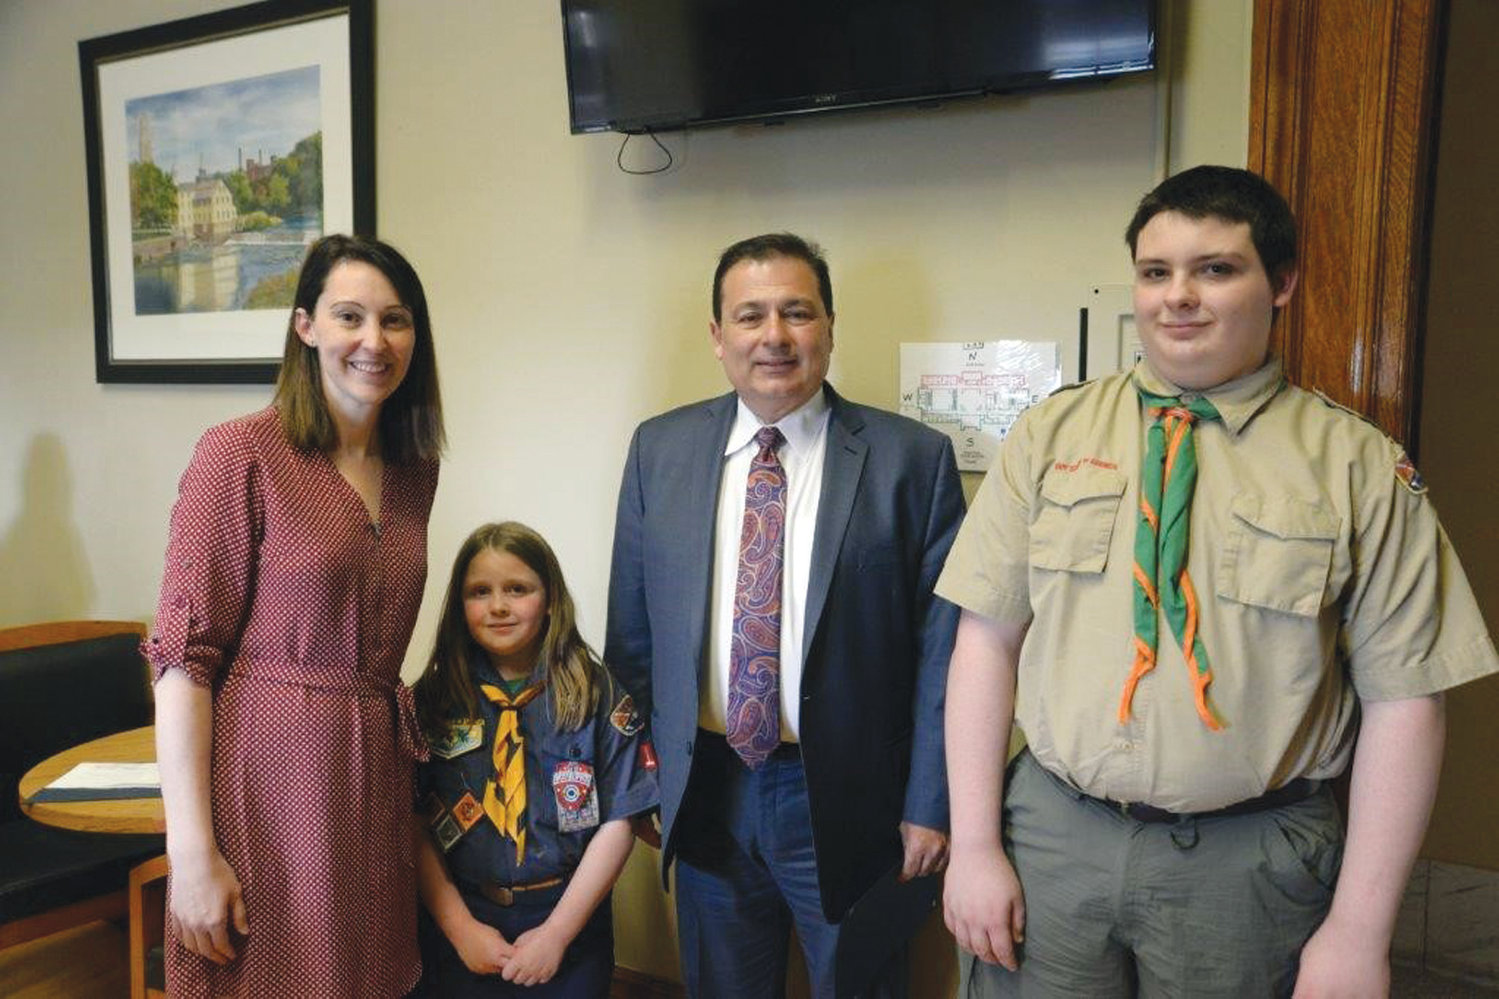 LEADING THE PACK: Tiffany Bumgardner-Scheffler, Director of Field Services/COO of the Narragansett Council; Justina Ladino; Majority Leader Shekarchi and James Ladino pose during the recent Narragansett Council, Boy Scouts of America (NCBSA) tour of the State House.